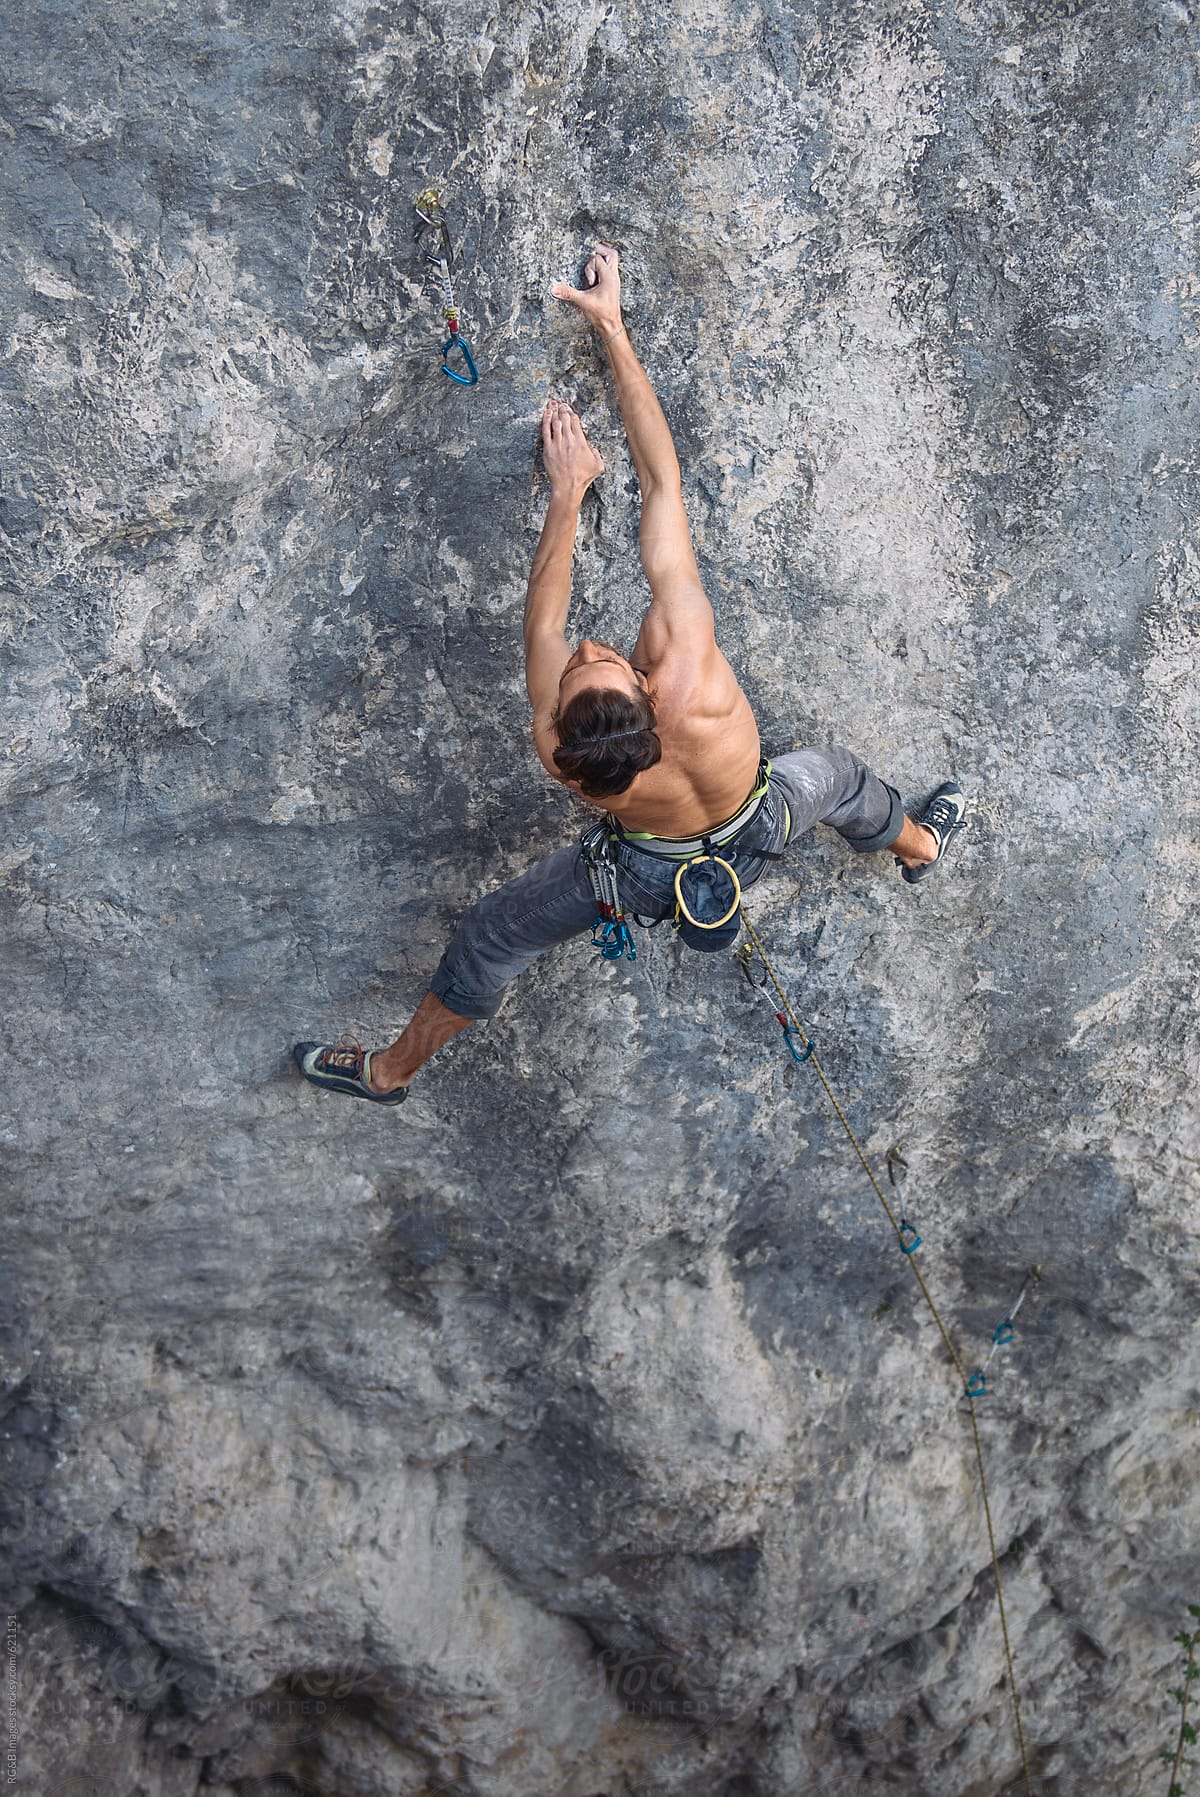 Male climber holding on a single finger hold